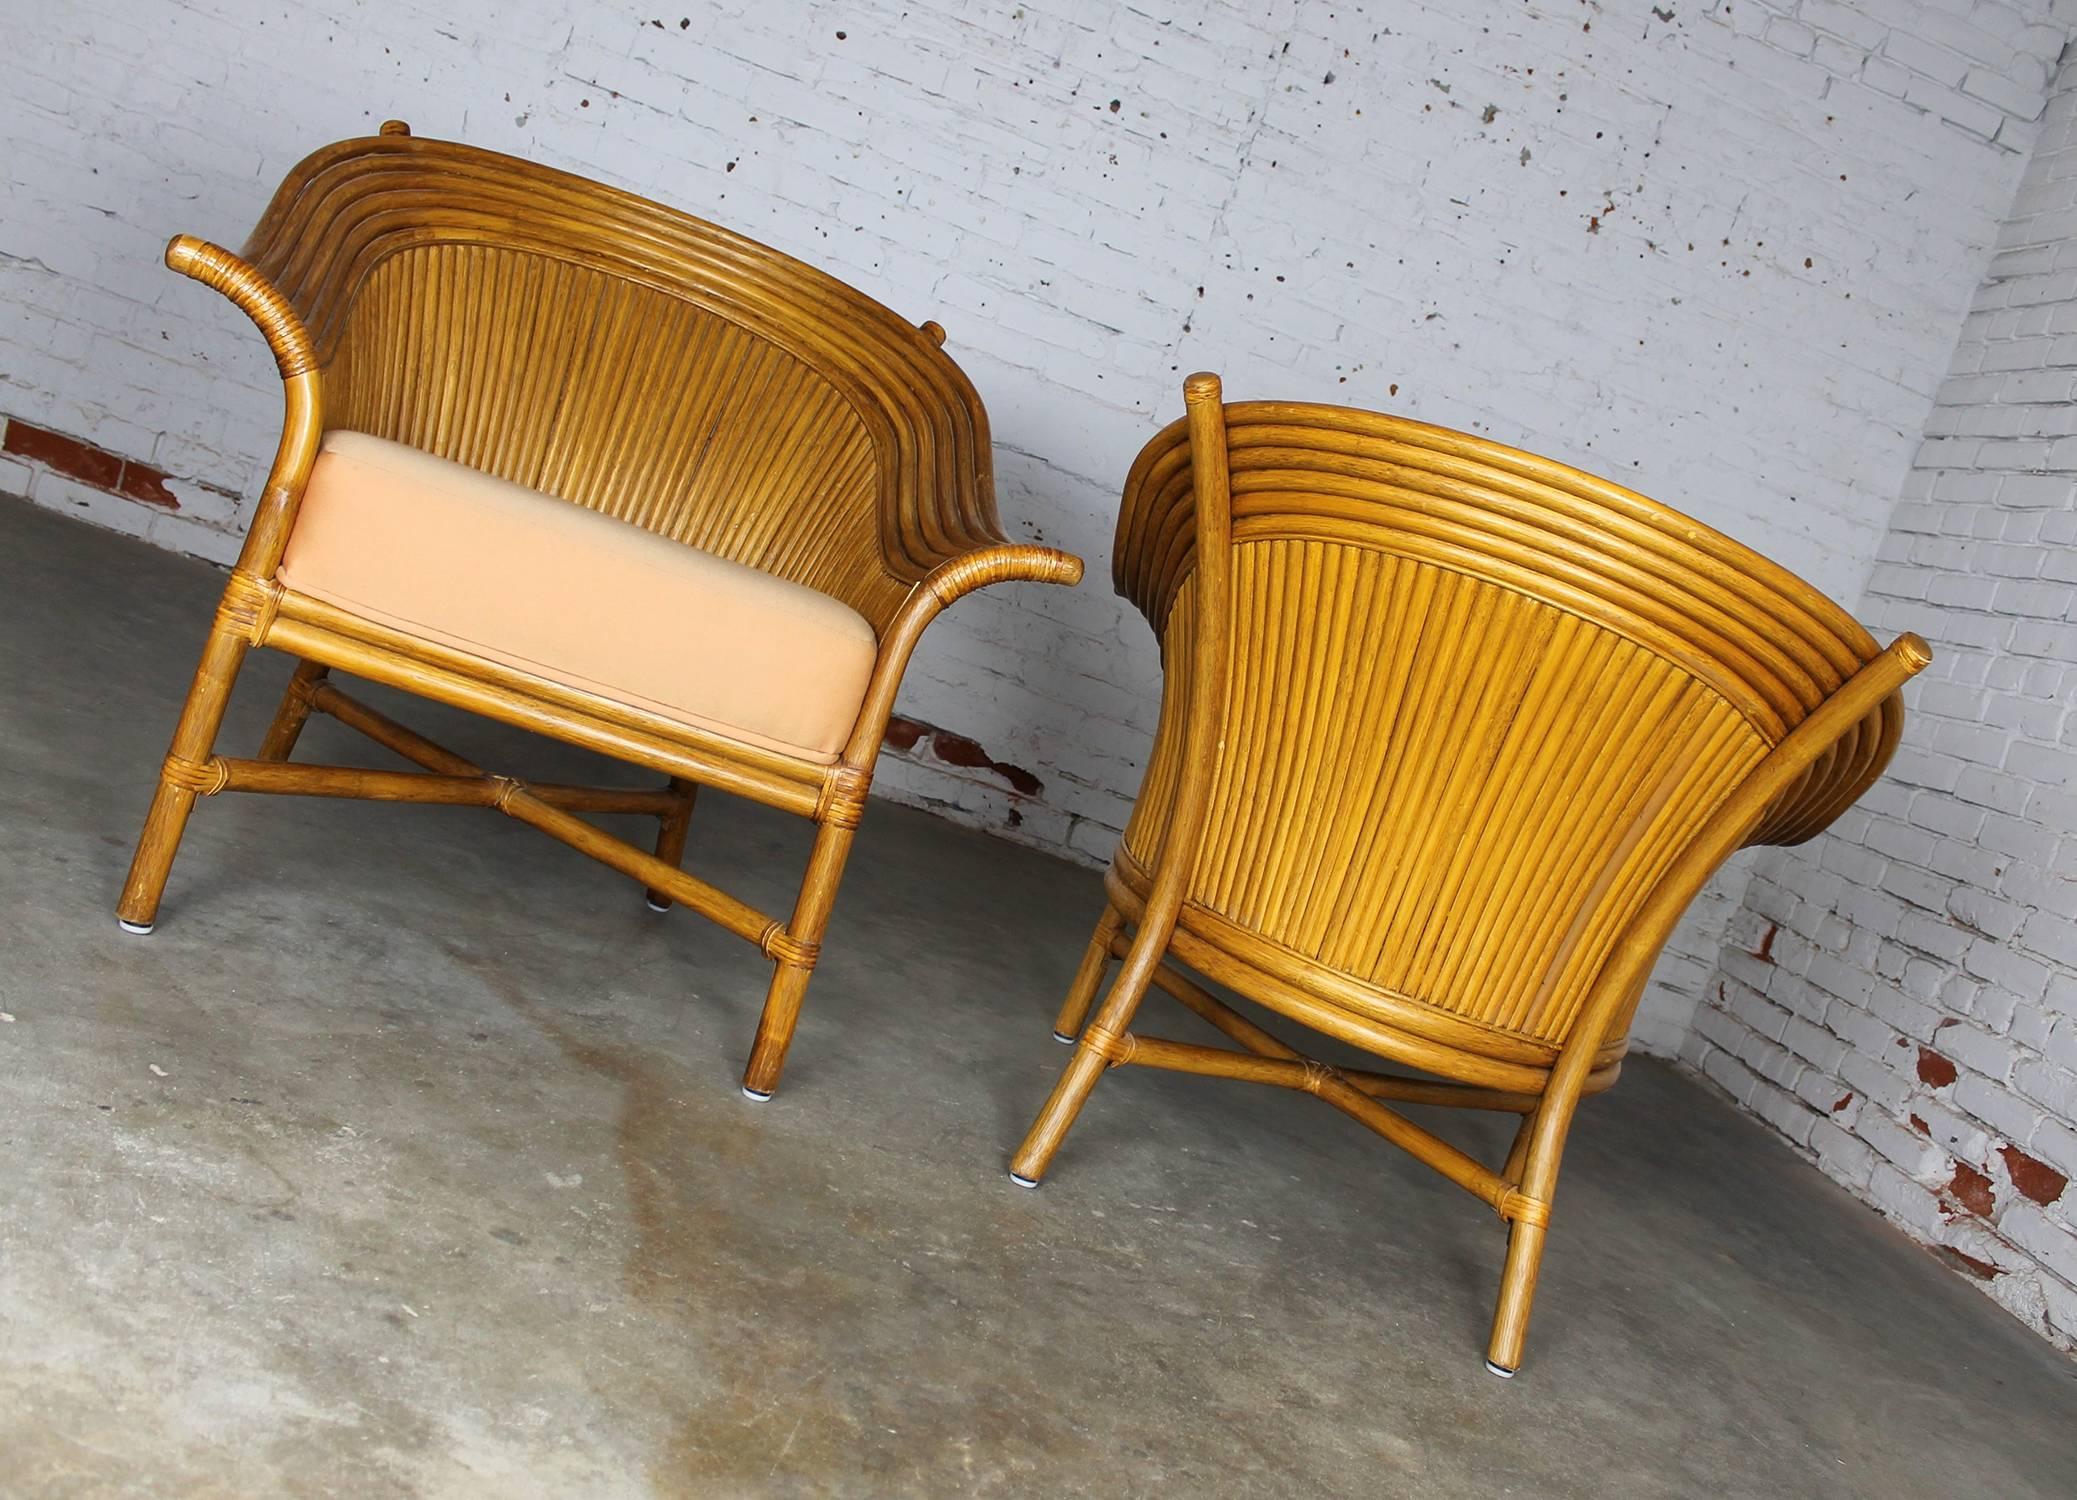 Awesome pair of circa 1990 fan back rattan club chairs in the style of McGuire. They have leather wrapped details, with a rather peach to Persian orange upholstered seat, and in wonderful vintage condition they are ready to use.

I can just see